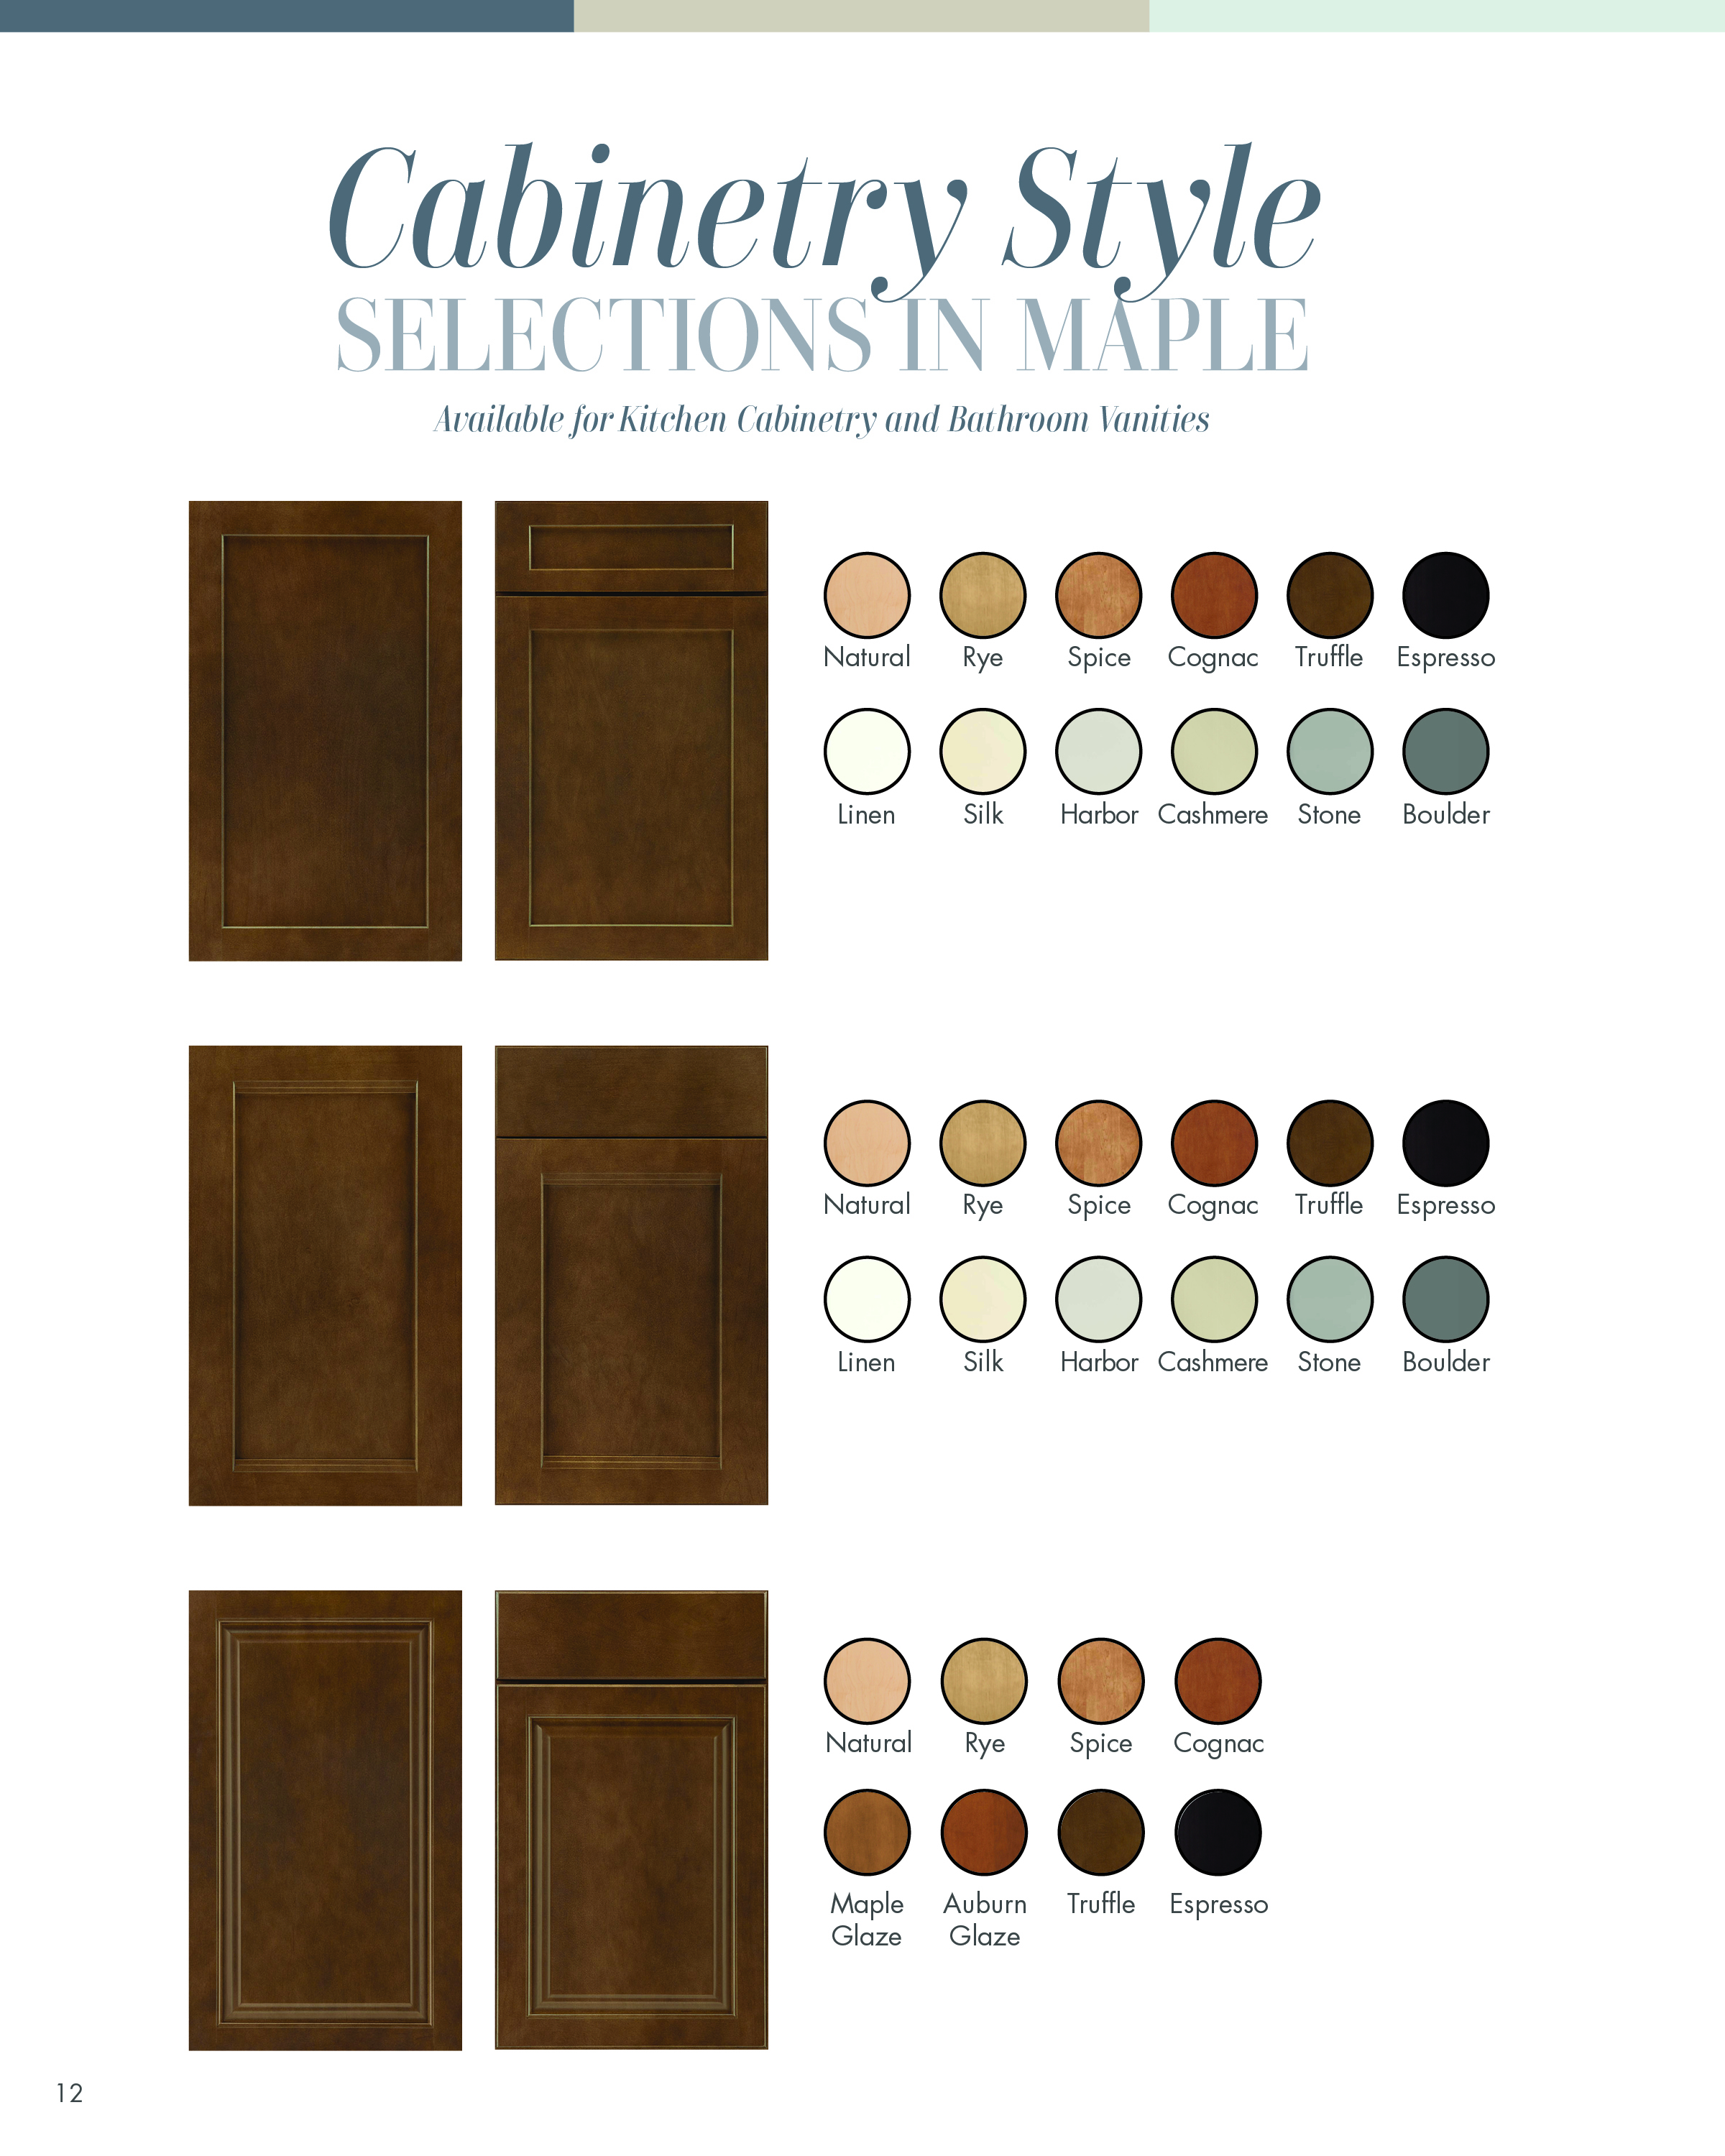 Cottages of Prairie's Edge Lookbook & Selection Guide12.jpg